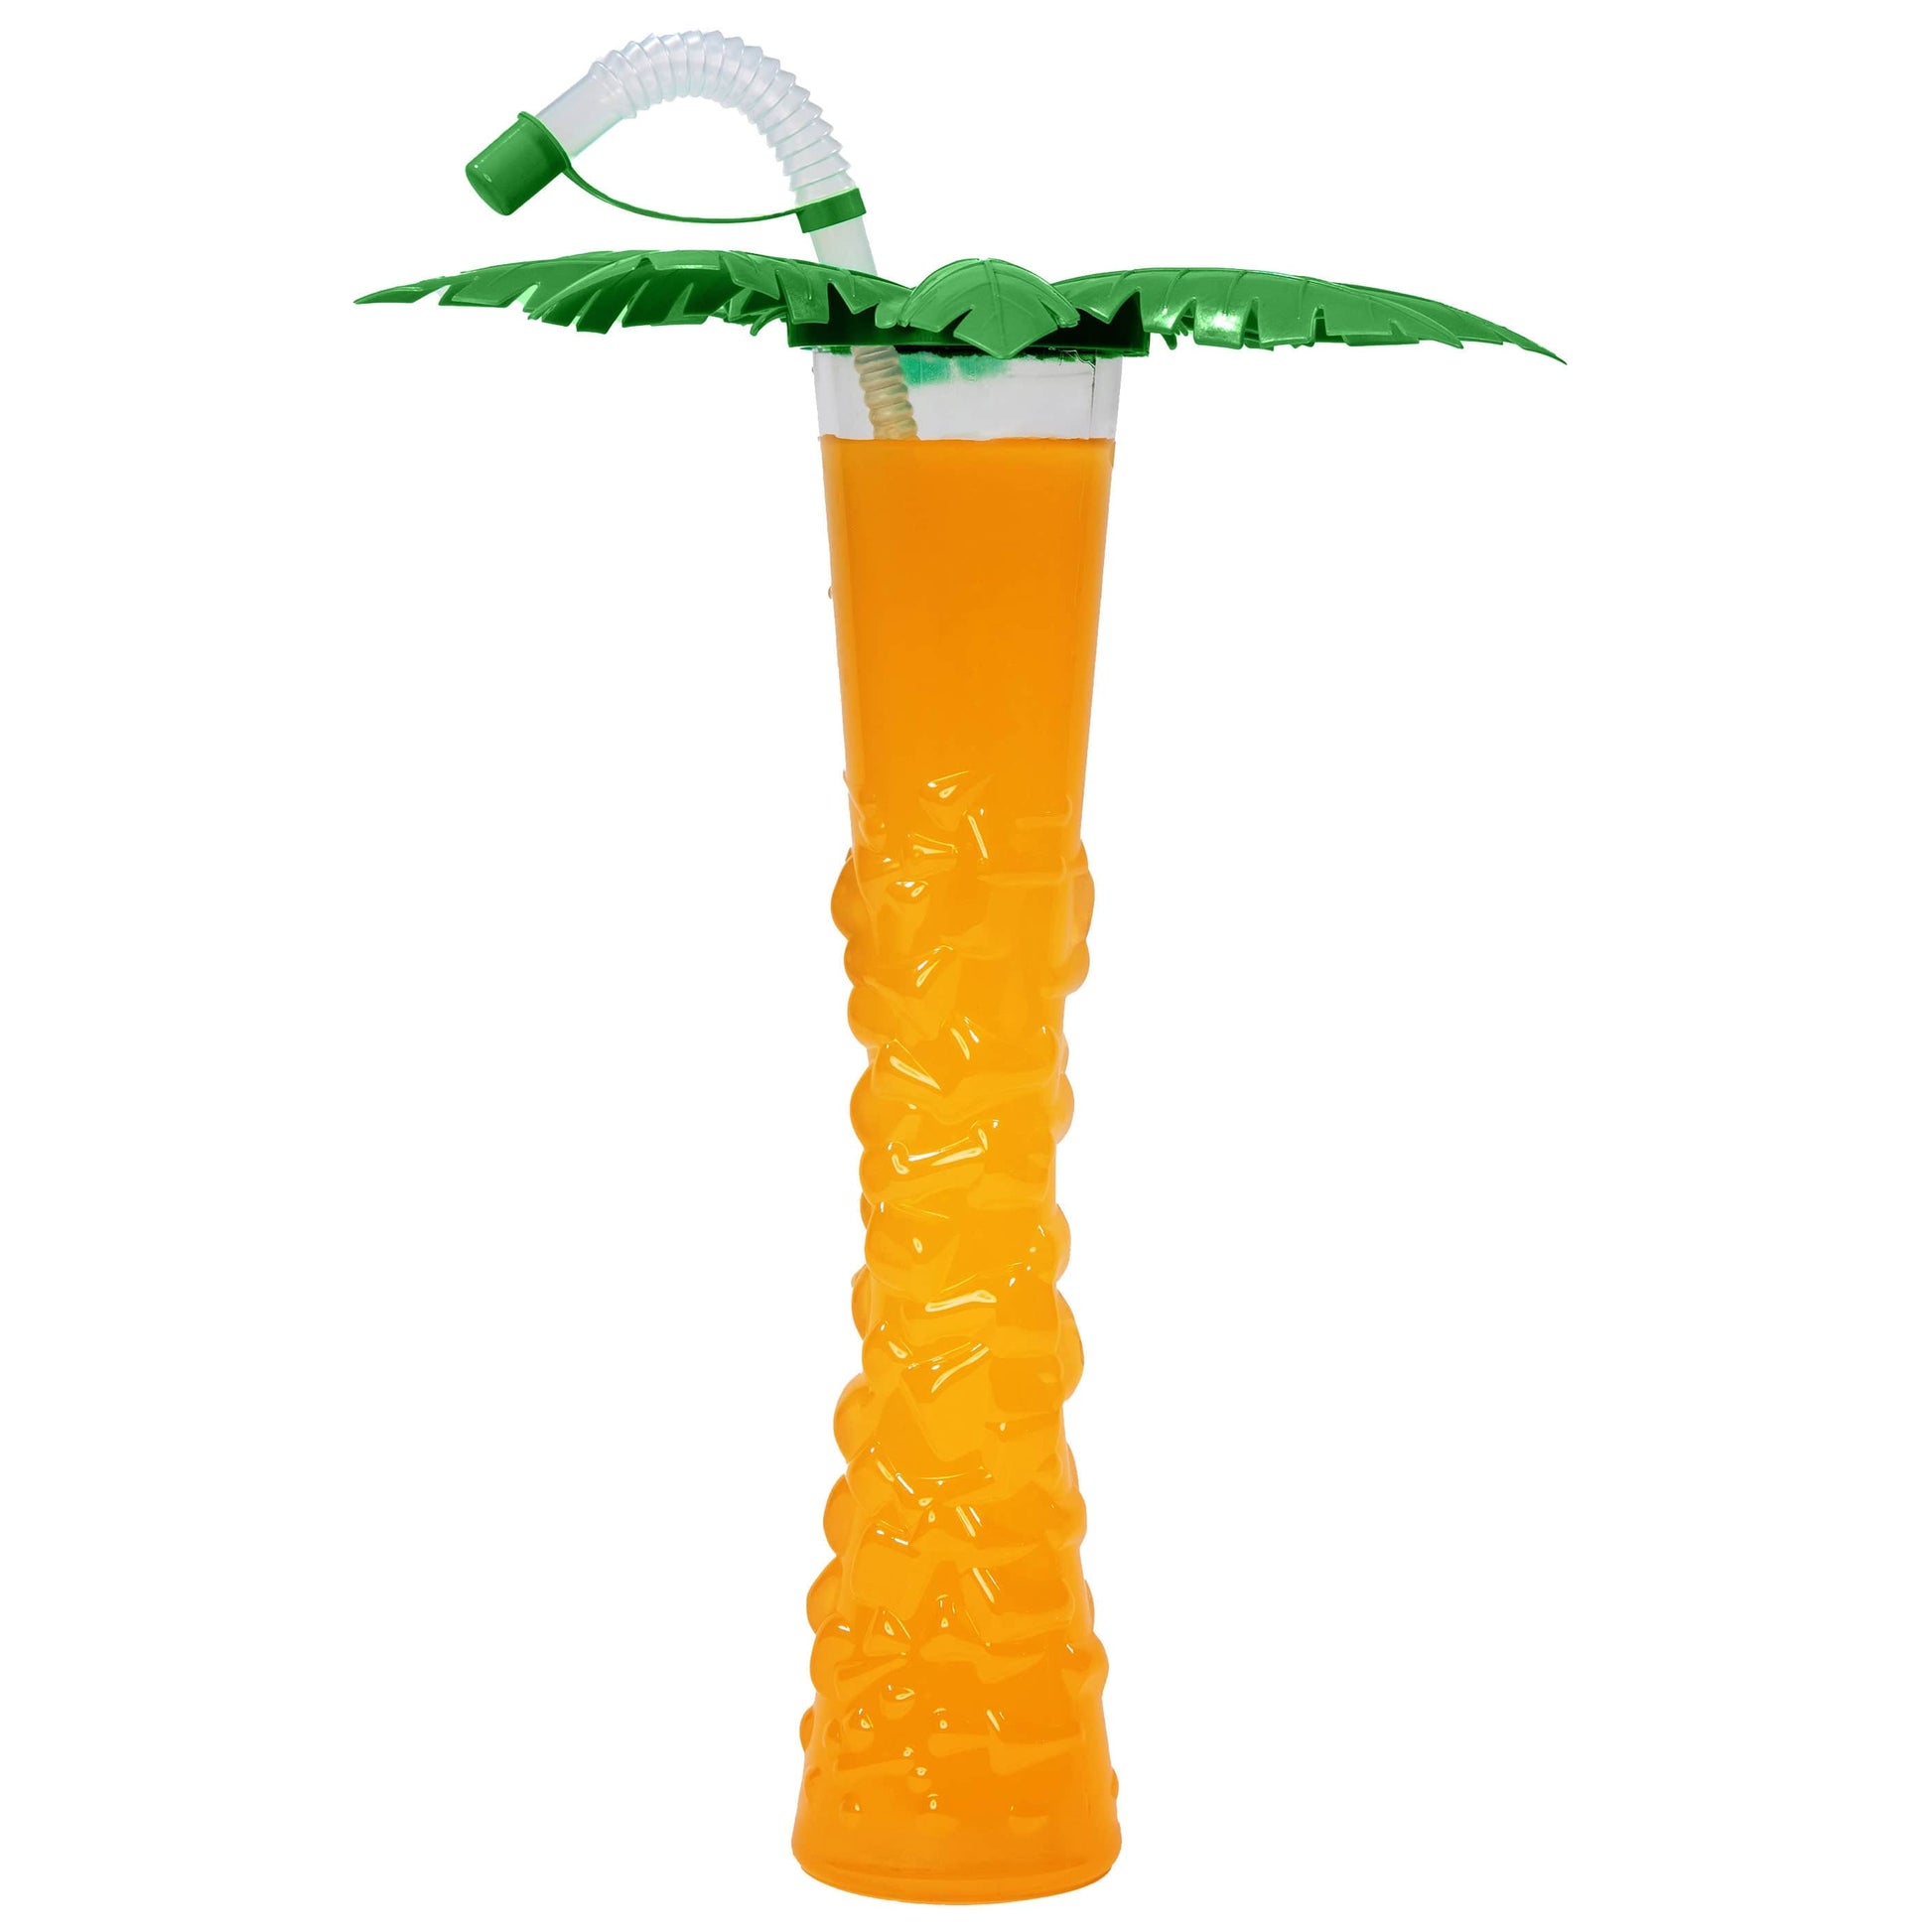 Palm Tree Yard Cup - 17 oz. (Box of 54 Cups) - Clear Cup with Yellow Palm Lids and Straws